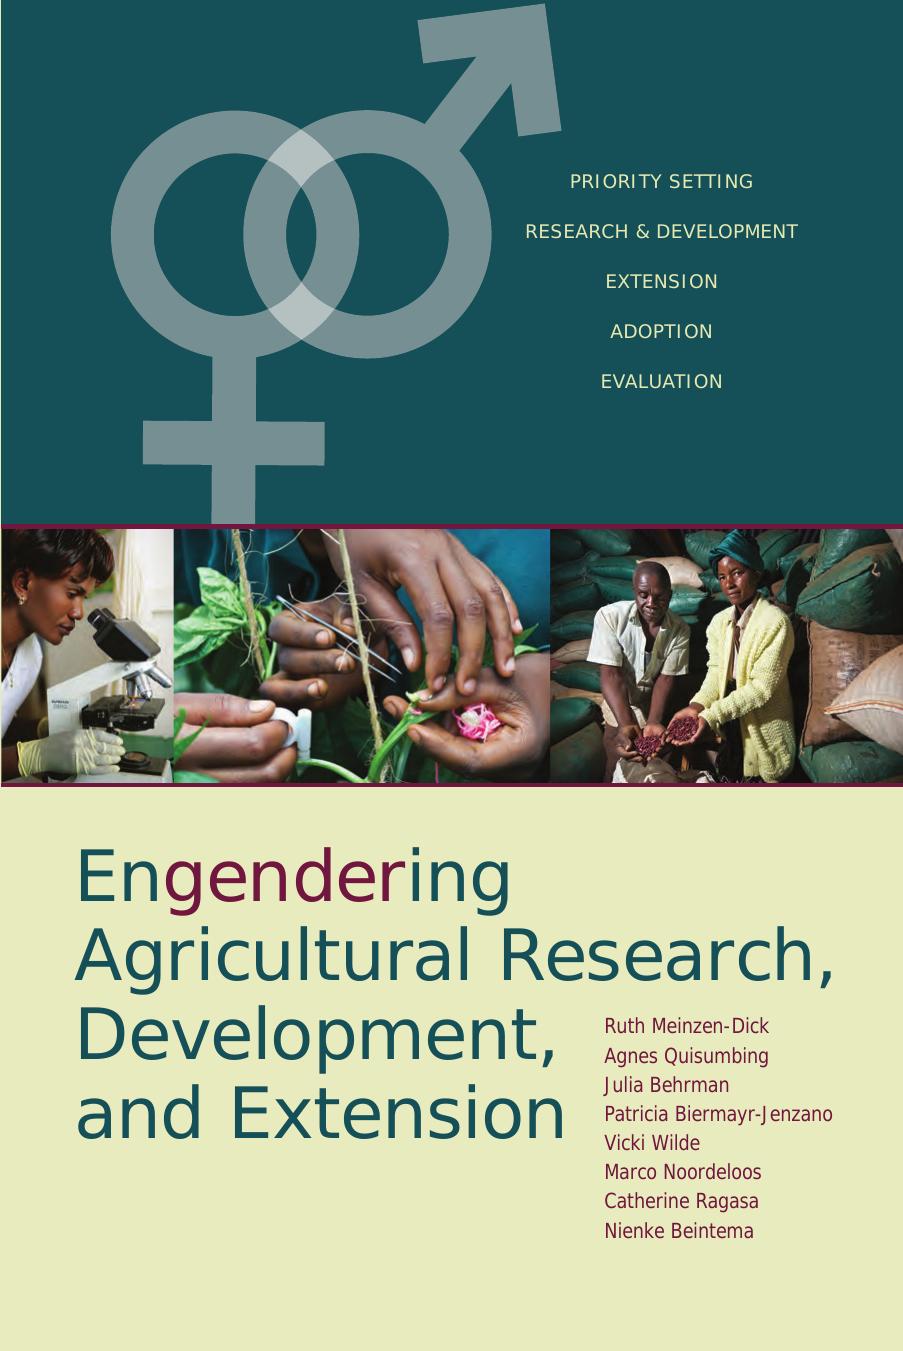 Engendering Agricultural Research, Development, and Extension